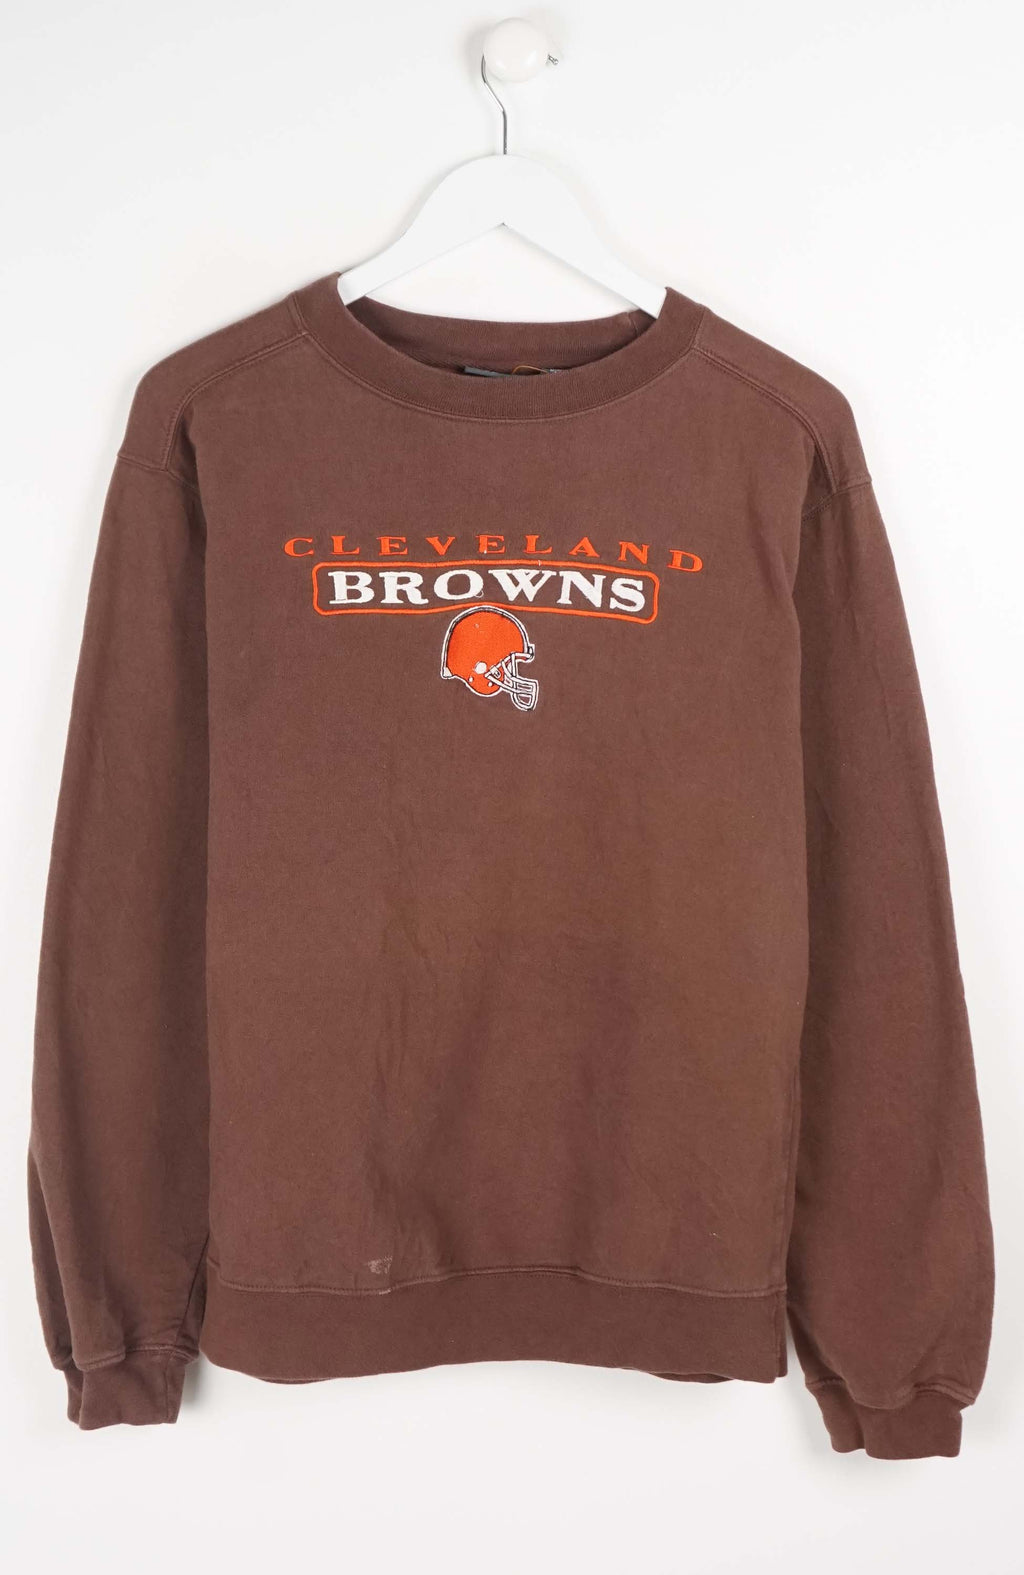 VINTAGE CLEVELAND BROWNS SWEATER (S)